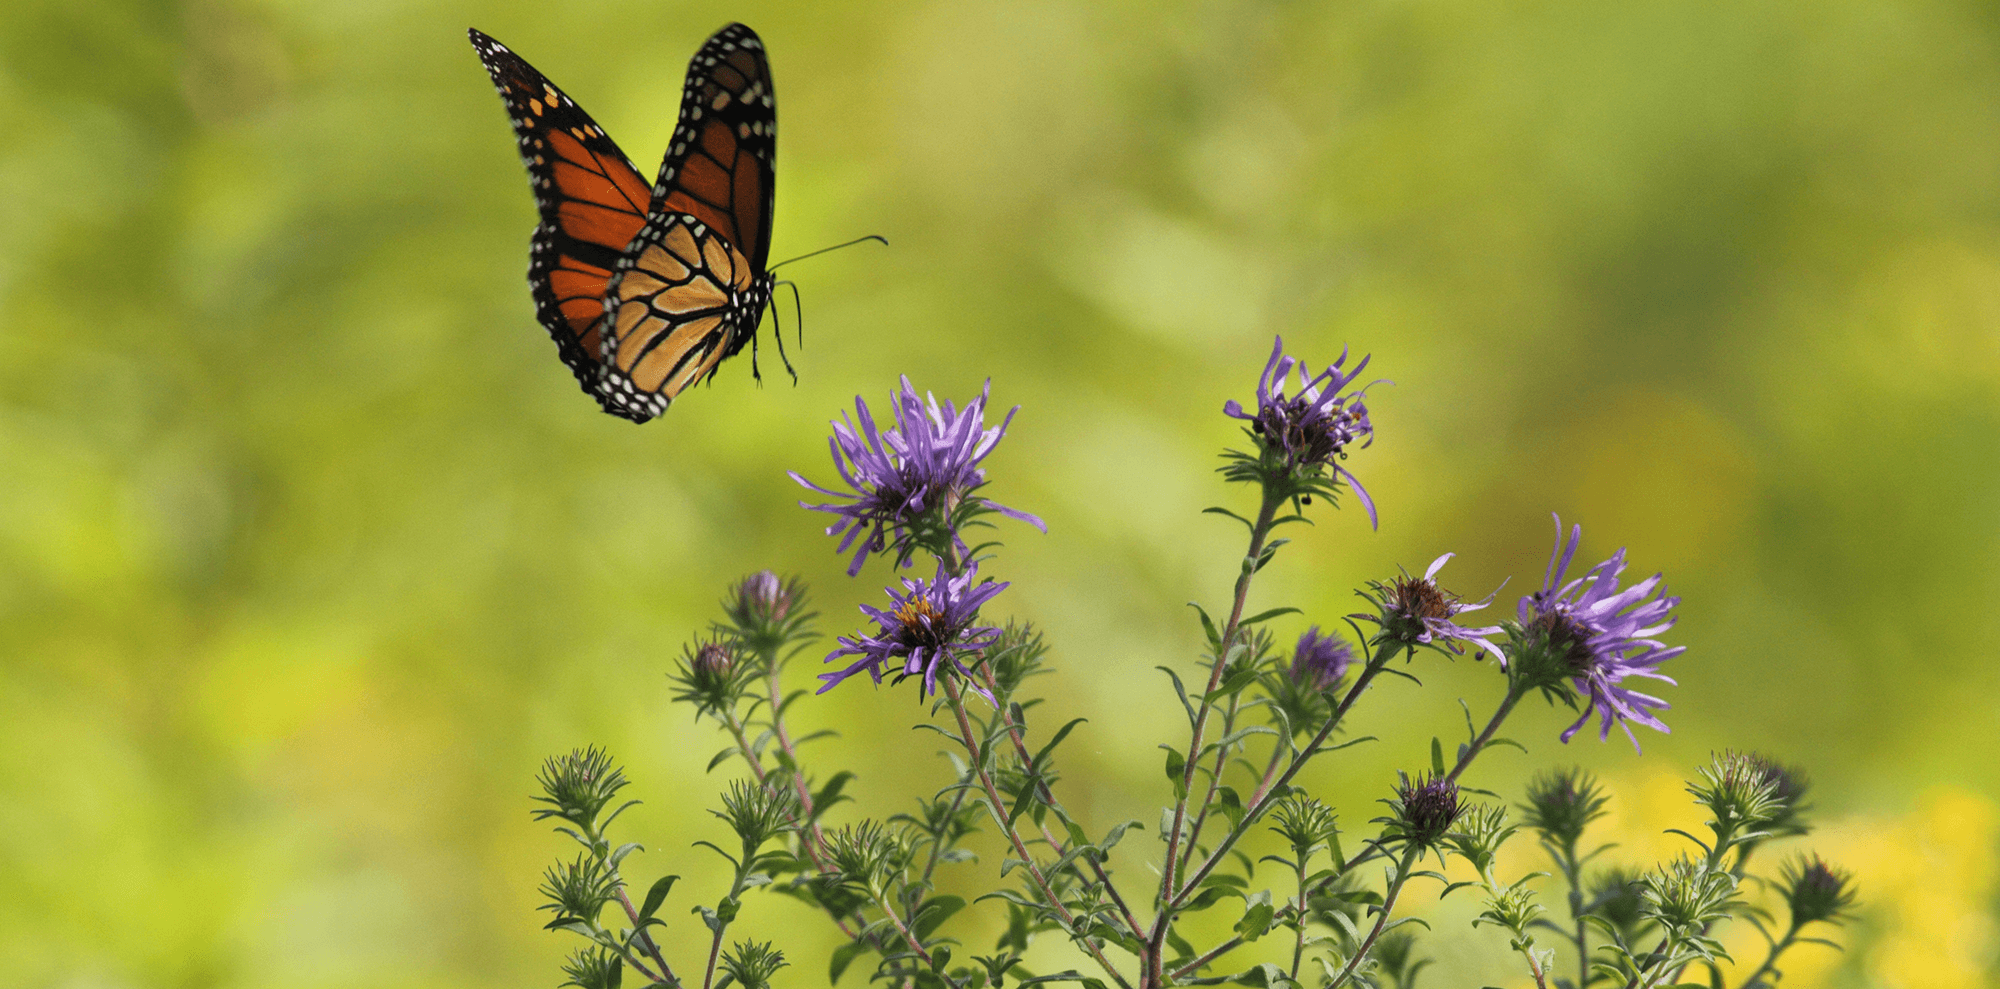 Monarch butterfly lands on a purple aster blossom.